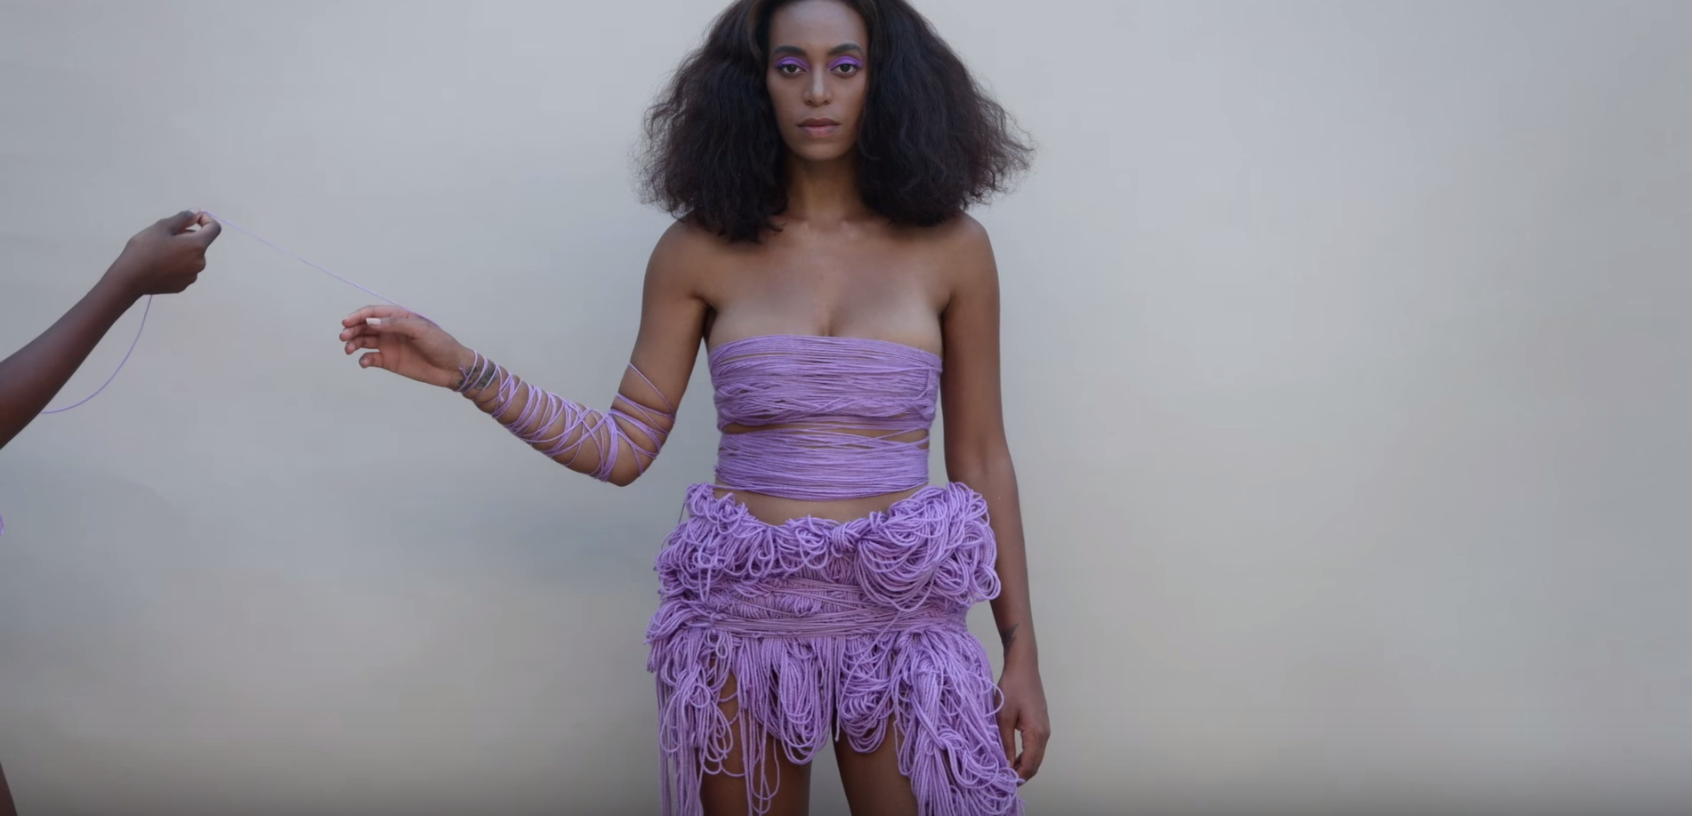 Oh, So This Is How Solange's Brilliant Single 'Cranes In The Sky' Came About